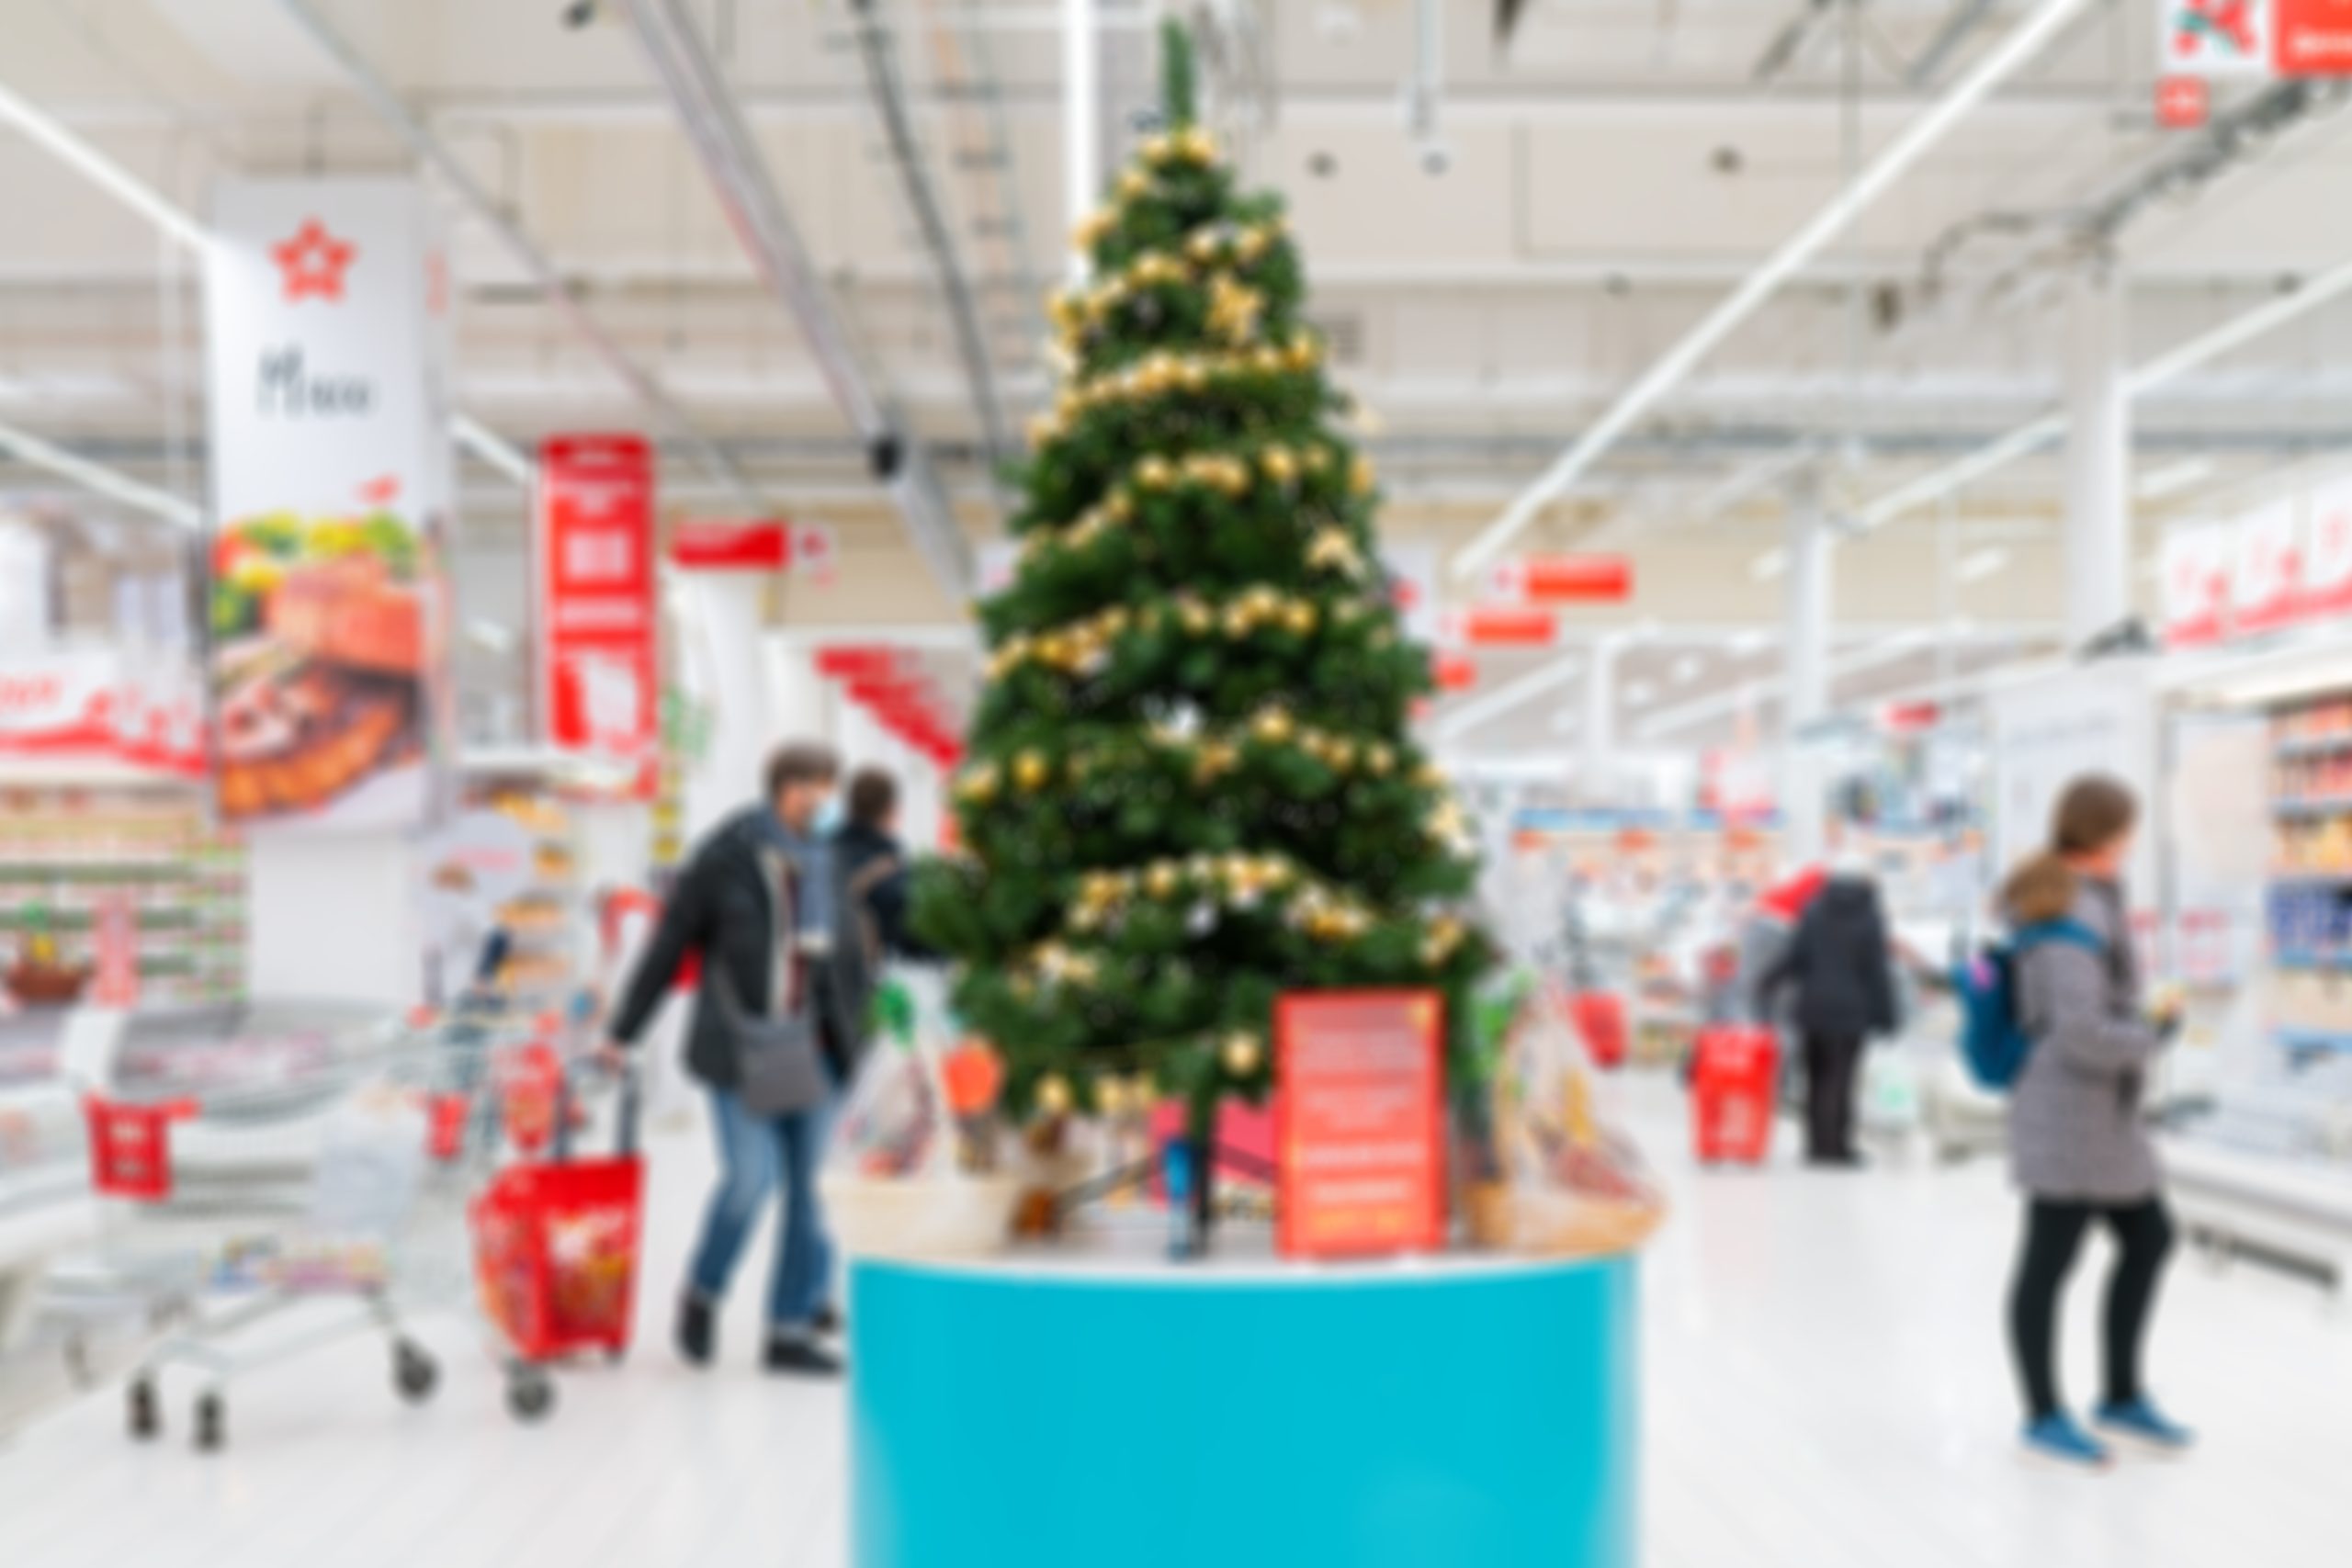 Christmas trading “up significantly” on 2021 figures